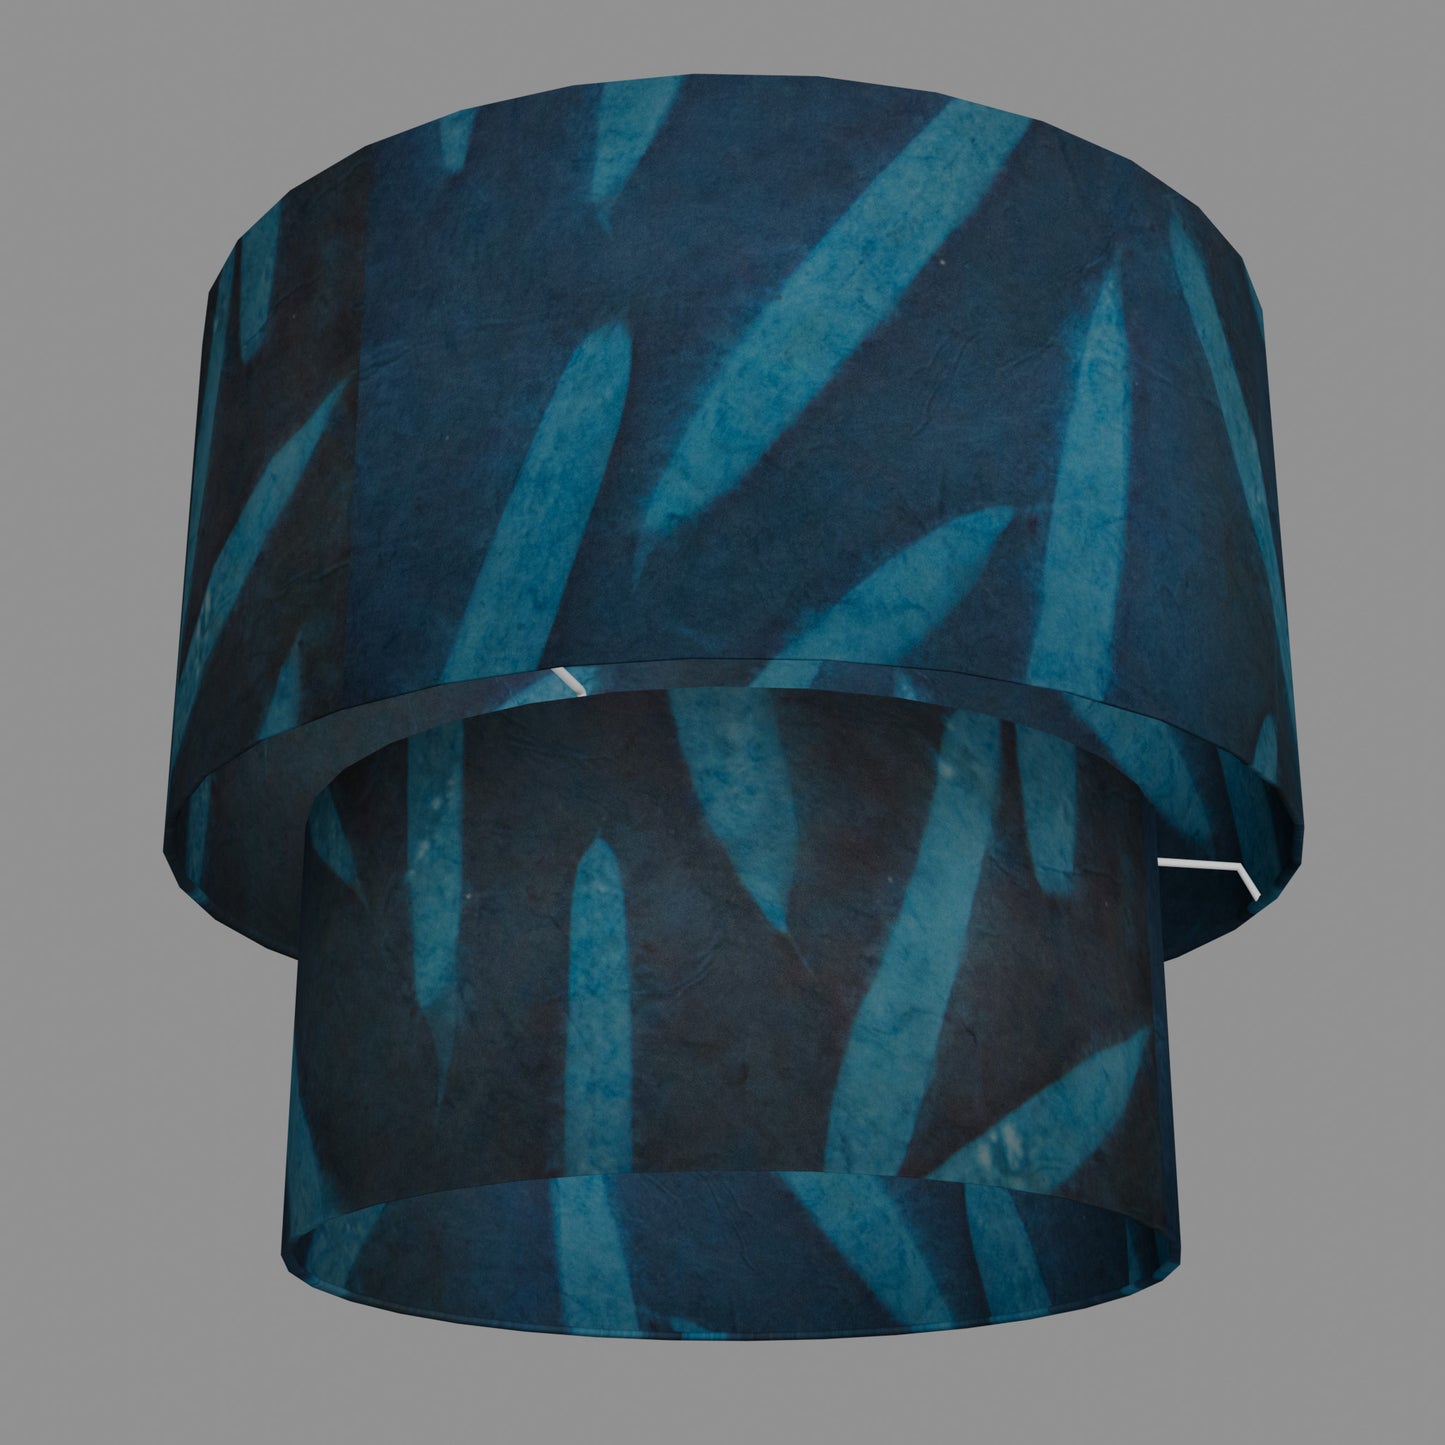 2 Tier Lamp Shade - P99 - Resistance Dyed Teal Bamboo, 40cm x 20cm & 30cm x 15cm